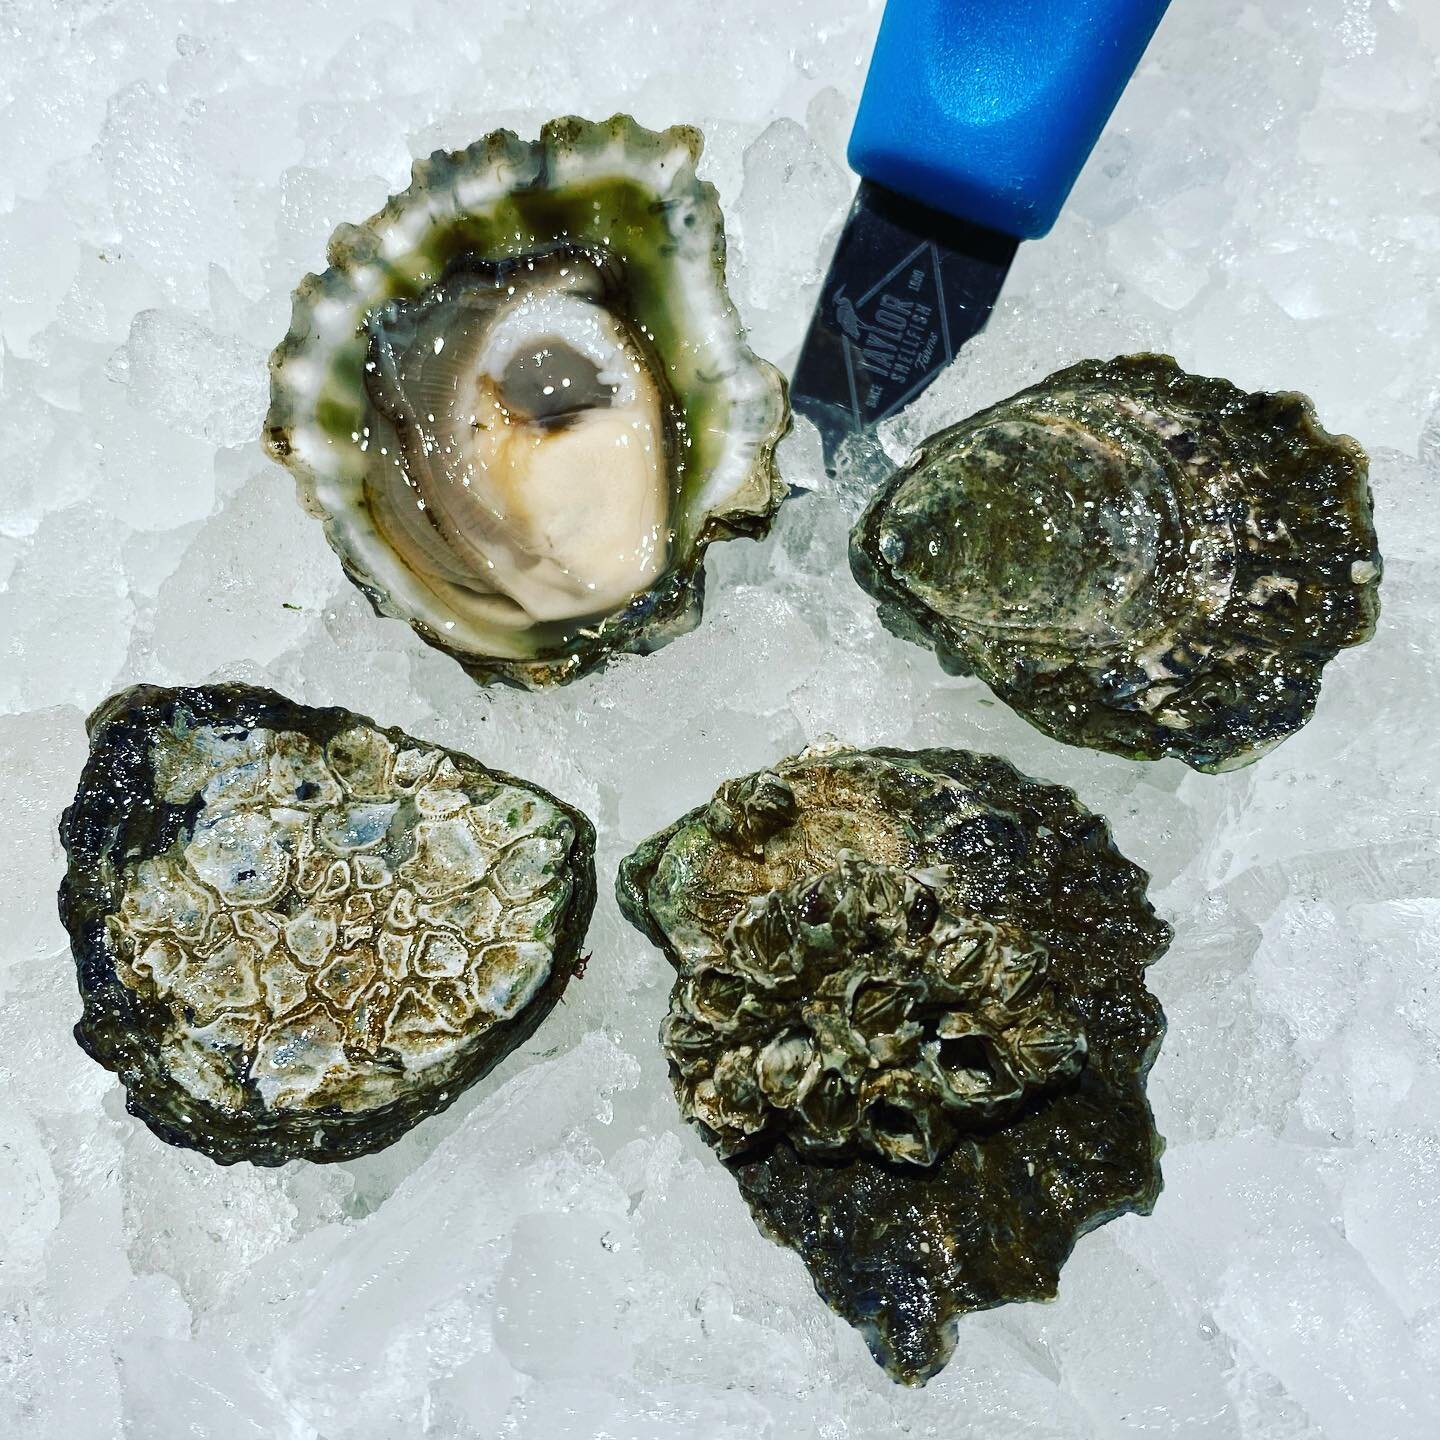 Olympia Oysters. The only oyster species and variety native to the Pacific coast of North America. Available #docktodoor from @taylorshellfish. 

These glorious bivalves take four years to grow to the size of a half dollar and pack as much flavor as 